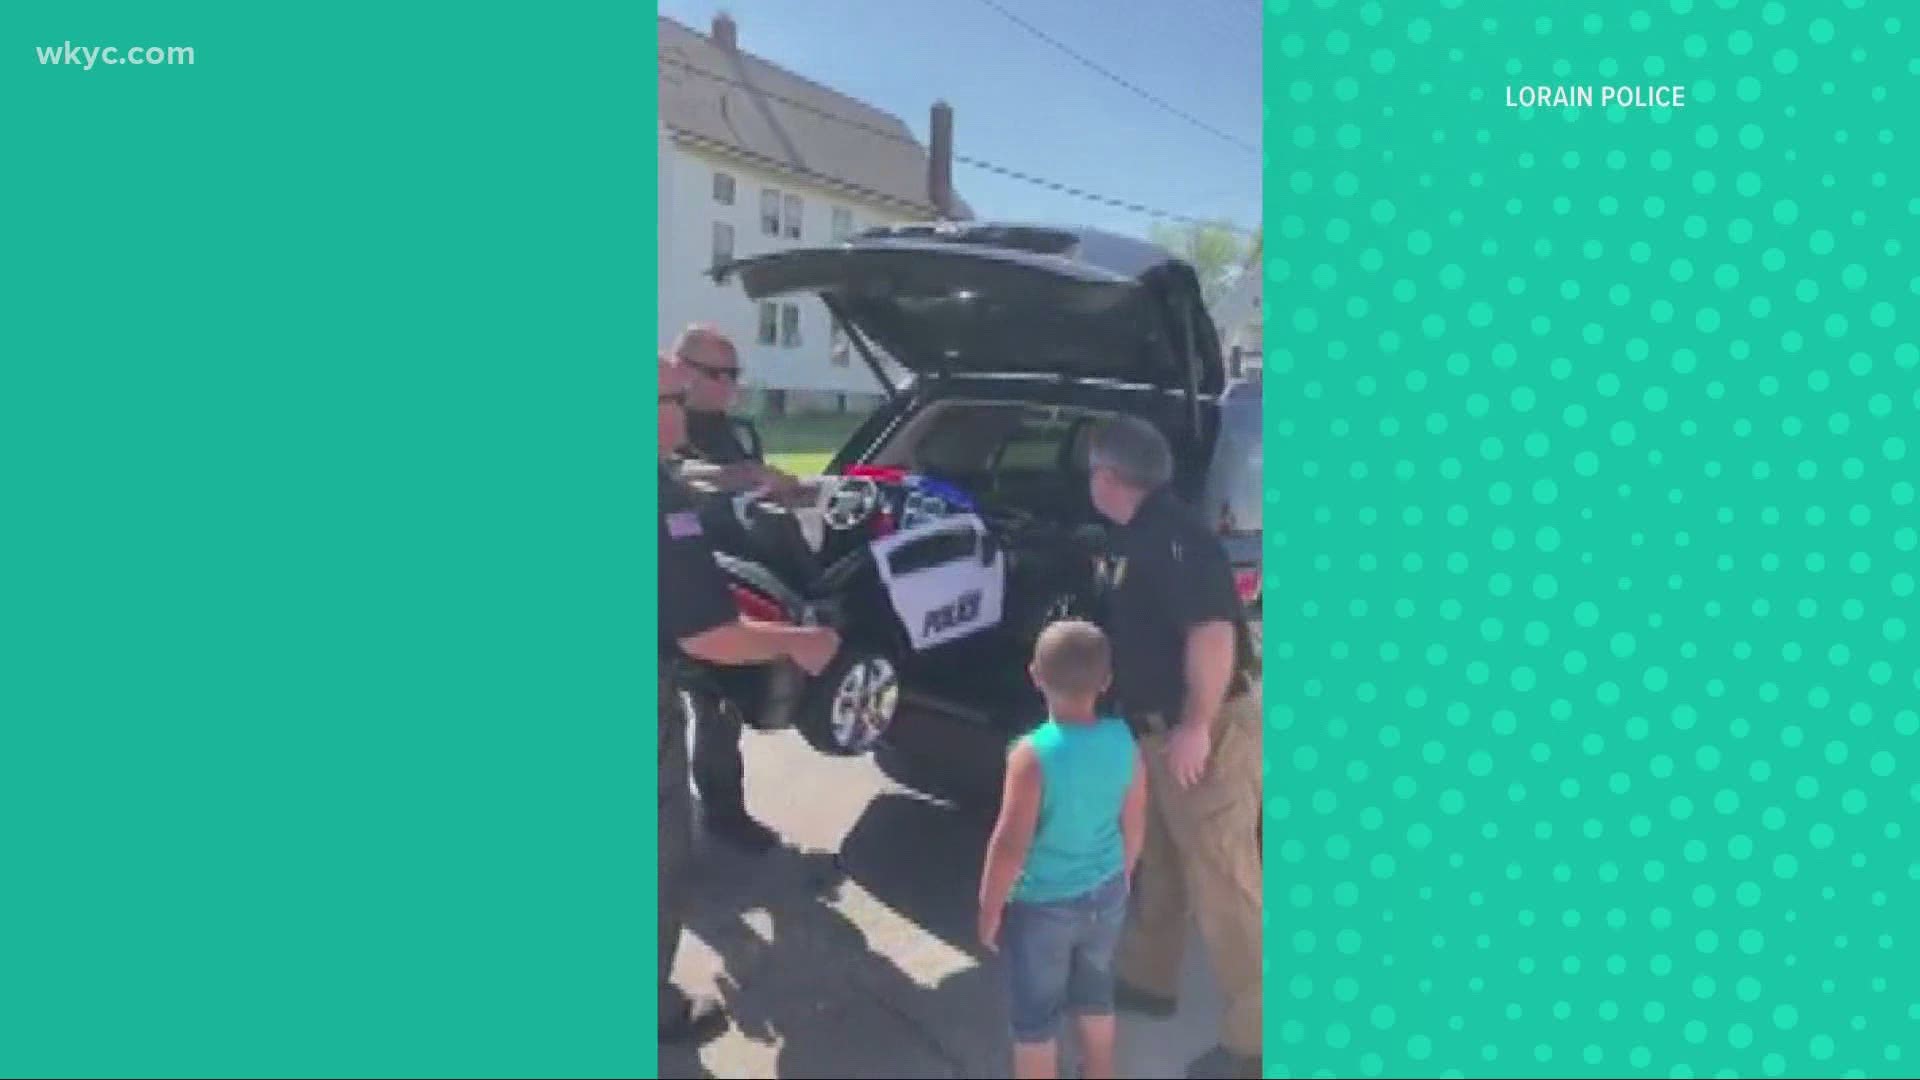 Lorain's police chief found out that 3-year-old Braylin's toy police car was destroyed by a tree during a storm. So he and his officers jumped into action.